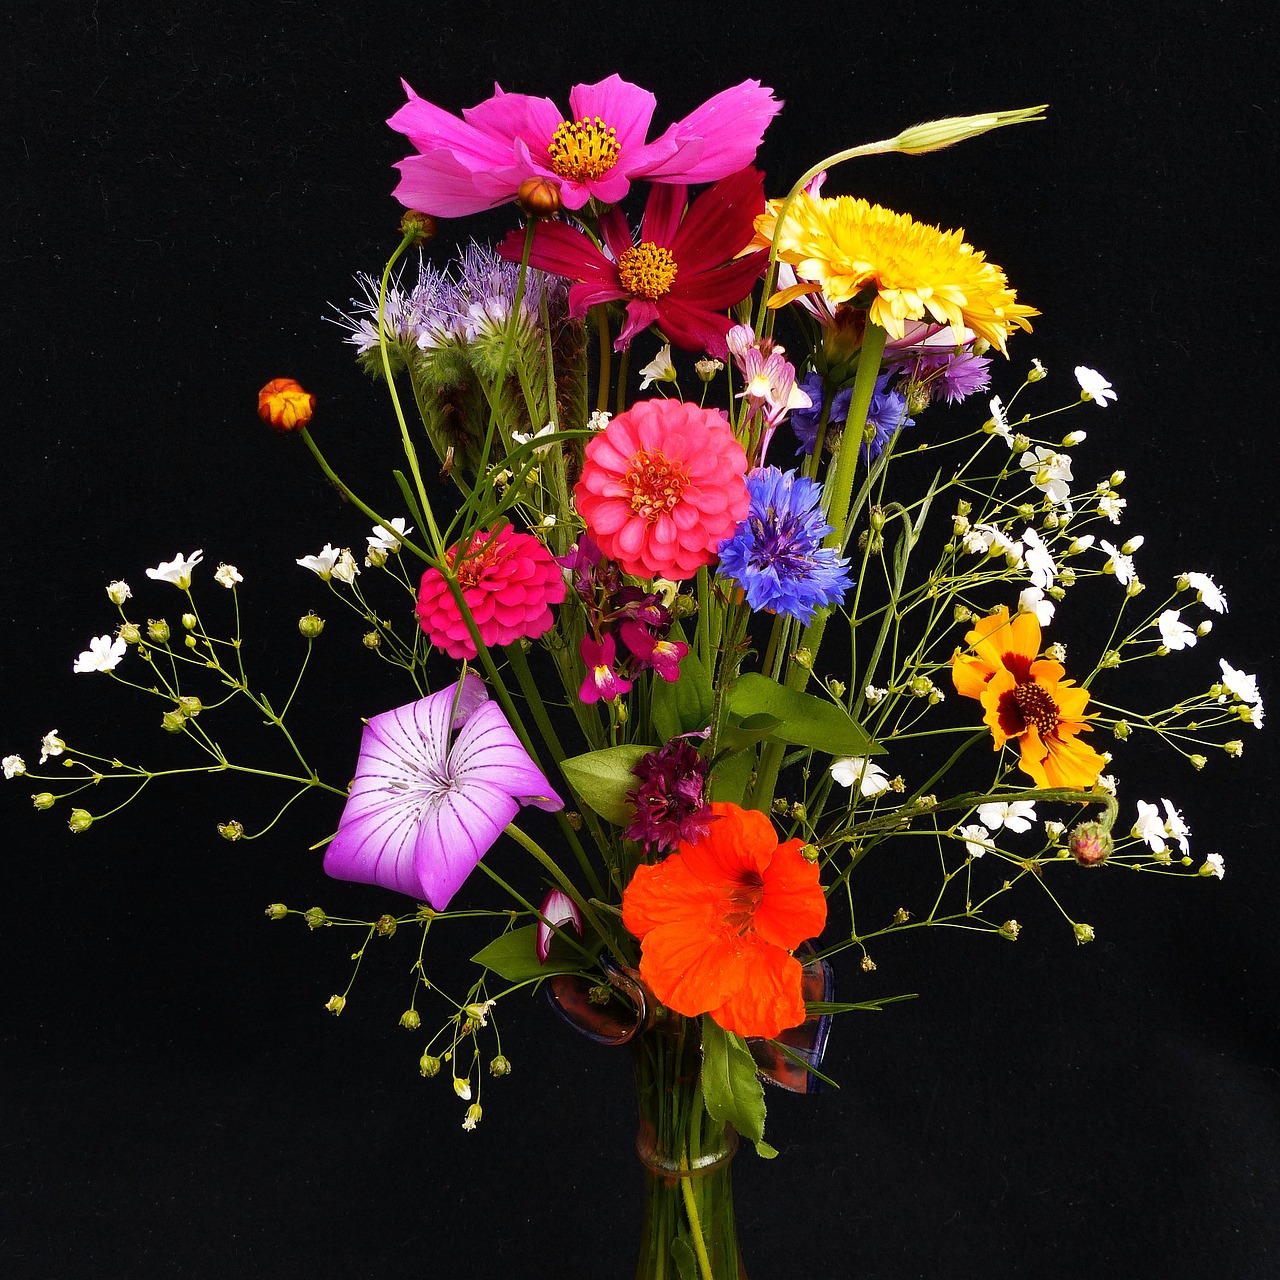 birthday bouquet wildflowers pointed bouquet free photo